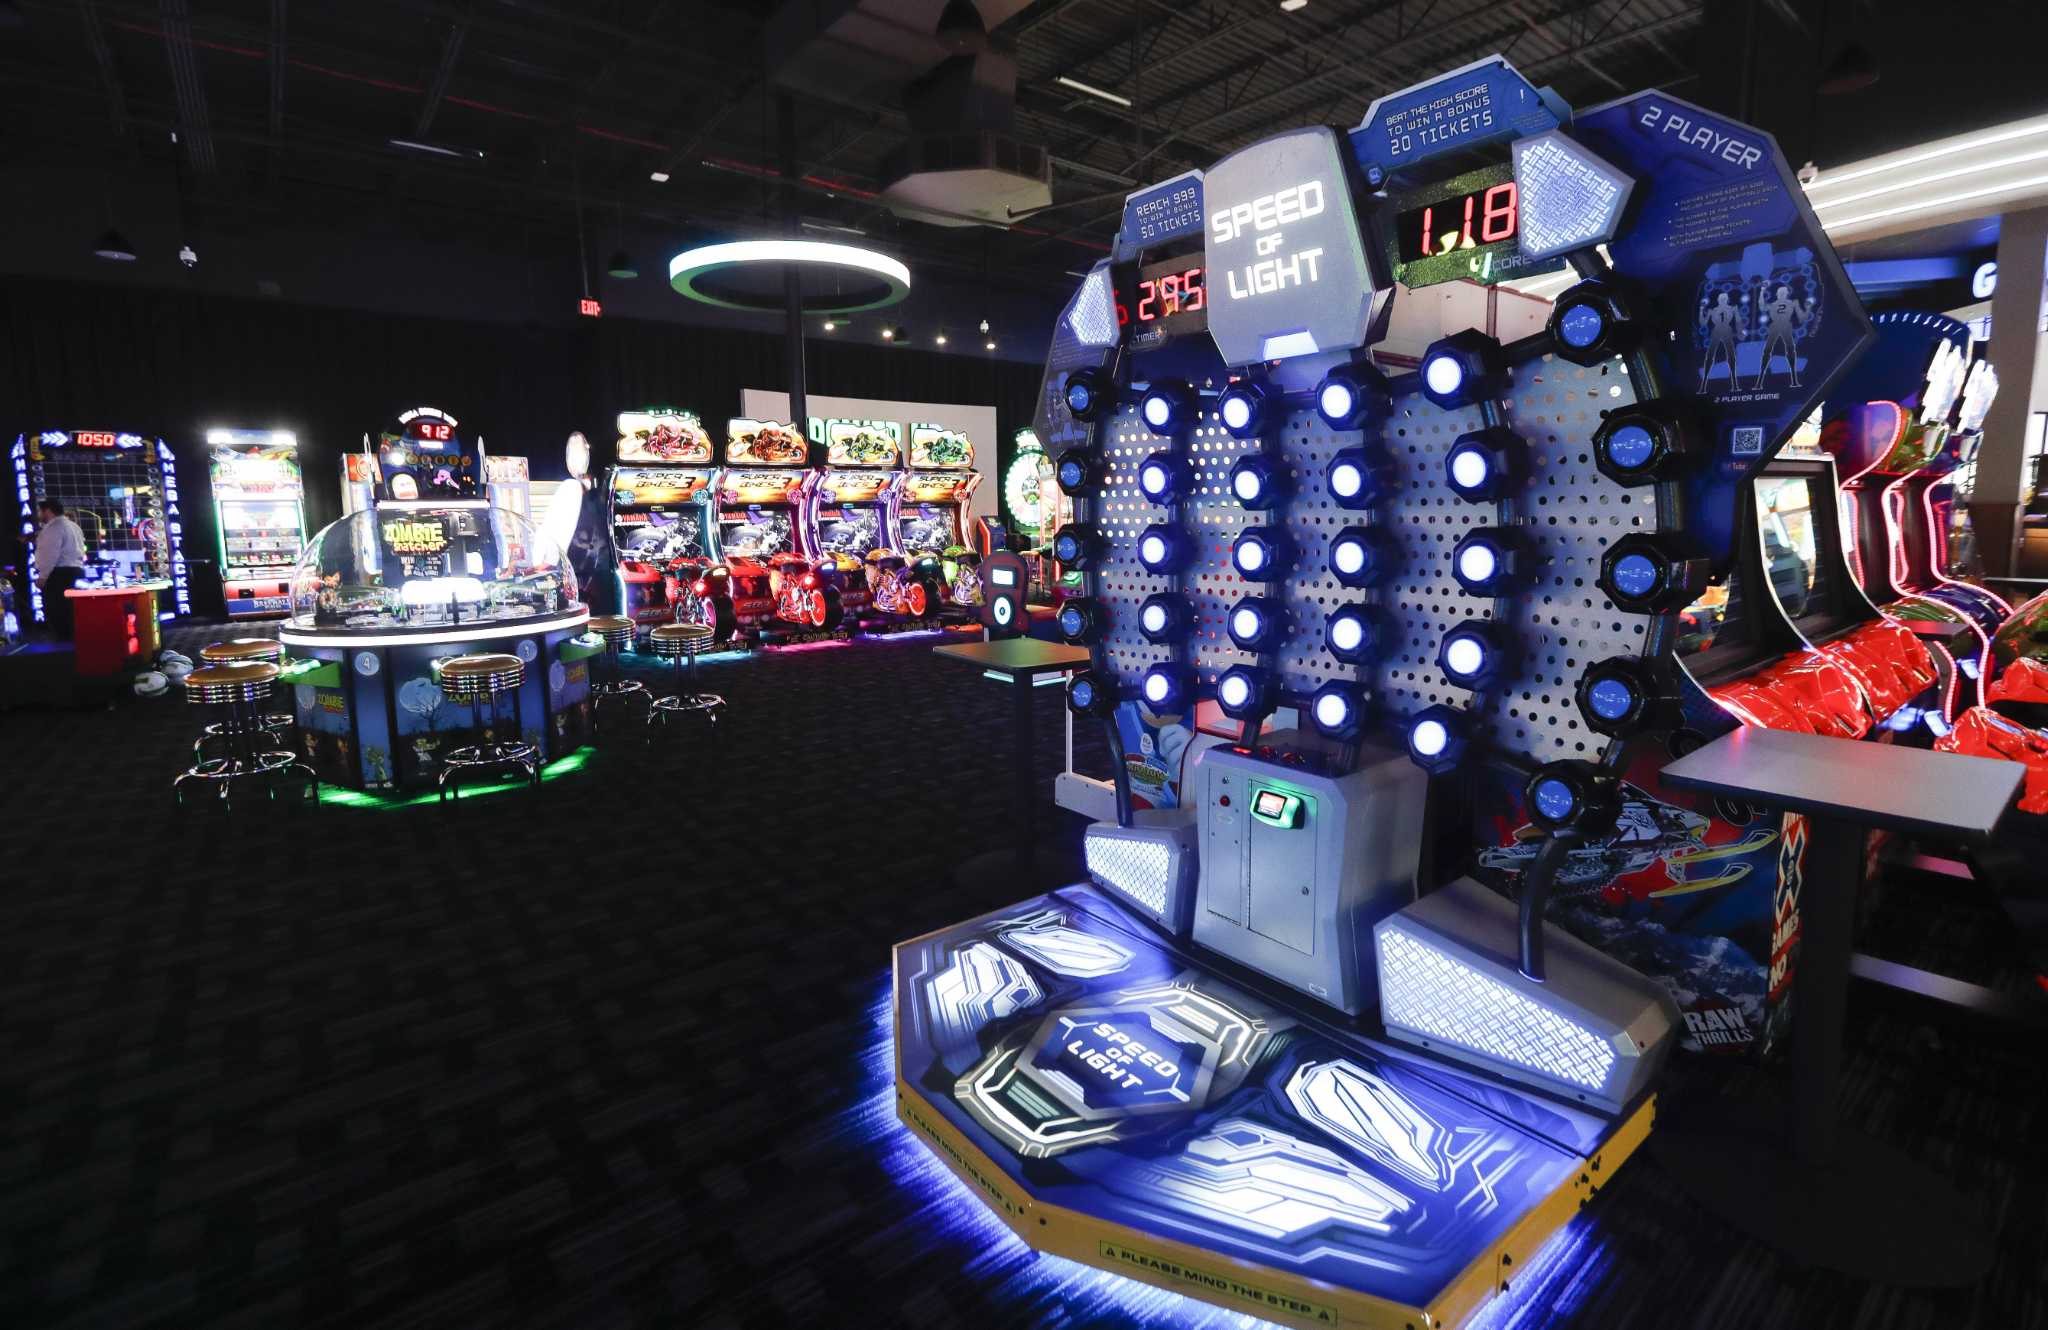 Dave & Buster's Woodlands